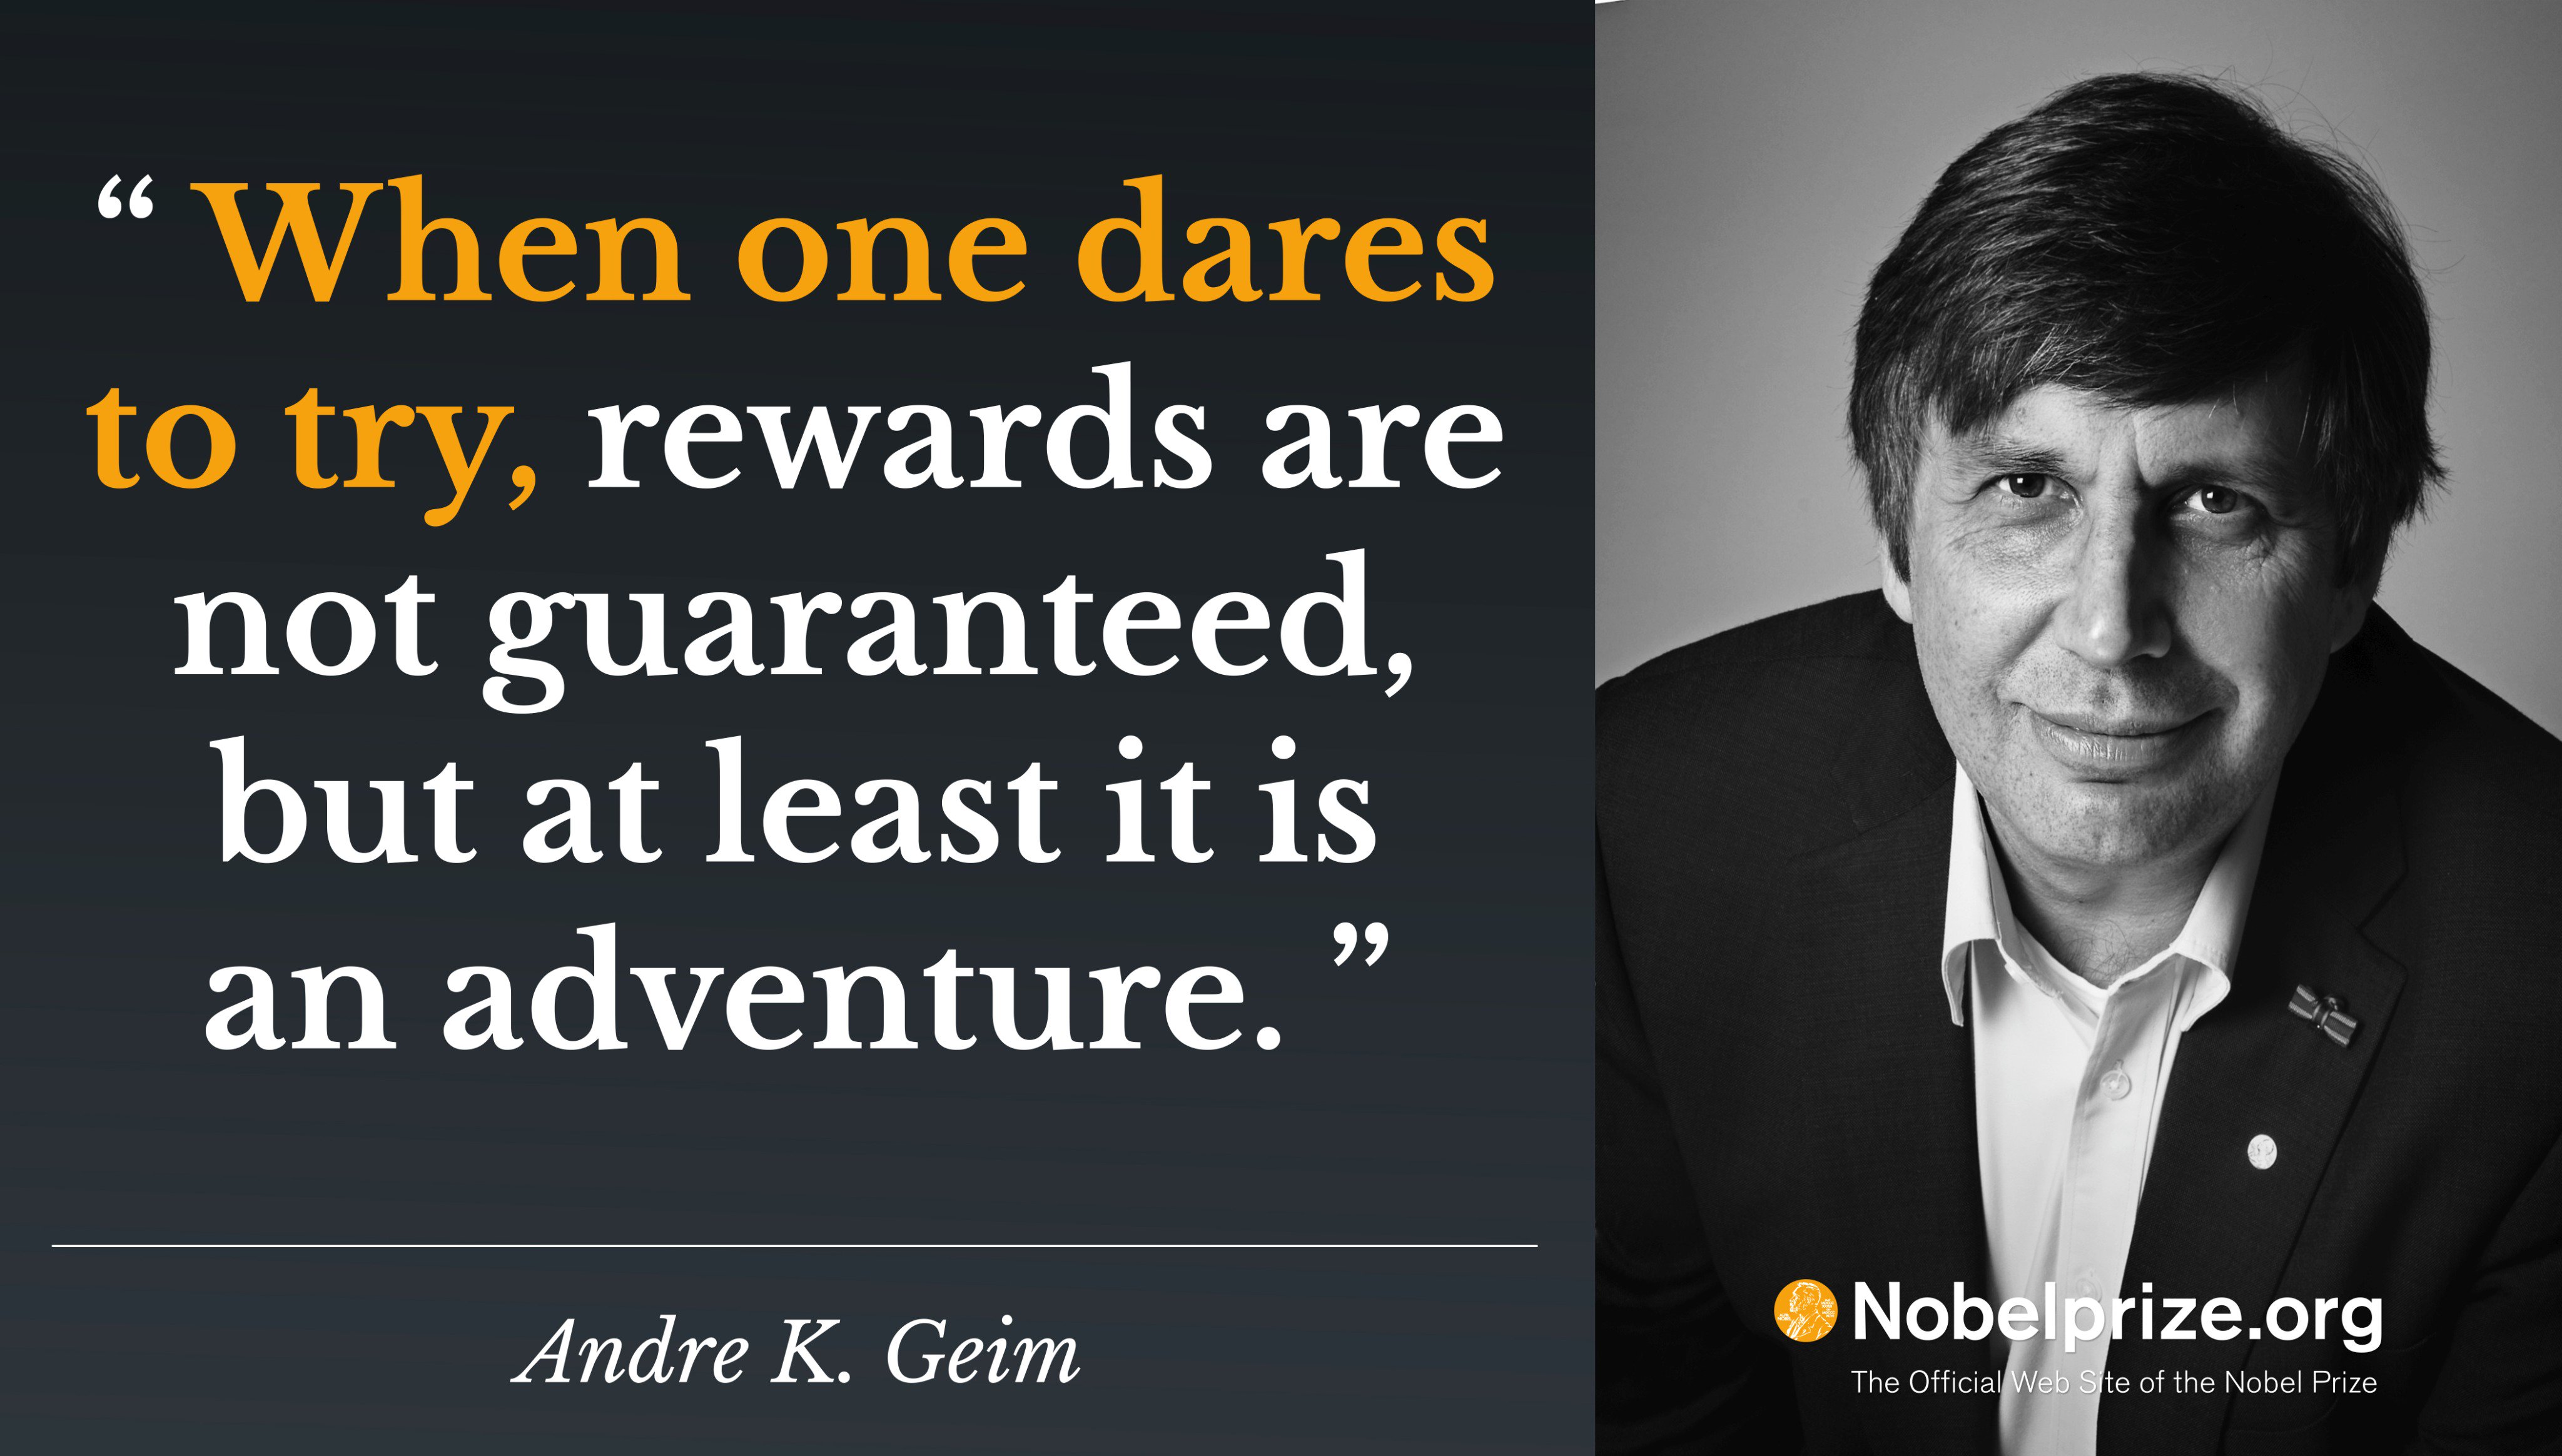 "When one dares to try, rewards are not guaranteed but at least it is an adventure" - Andre Geim. Image: The Nobel Prize / Supplied